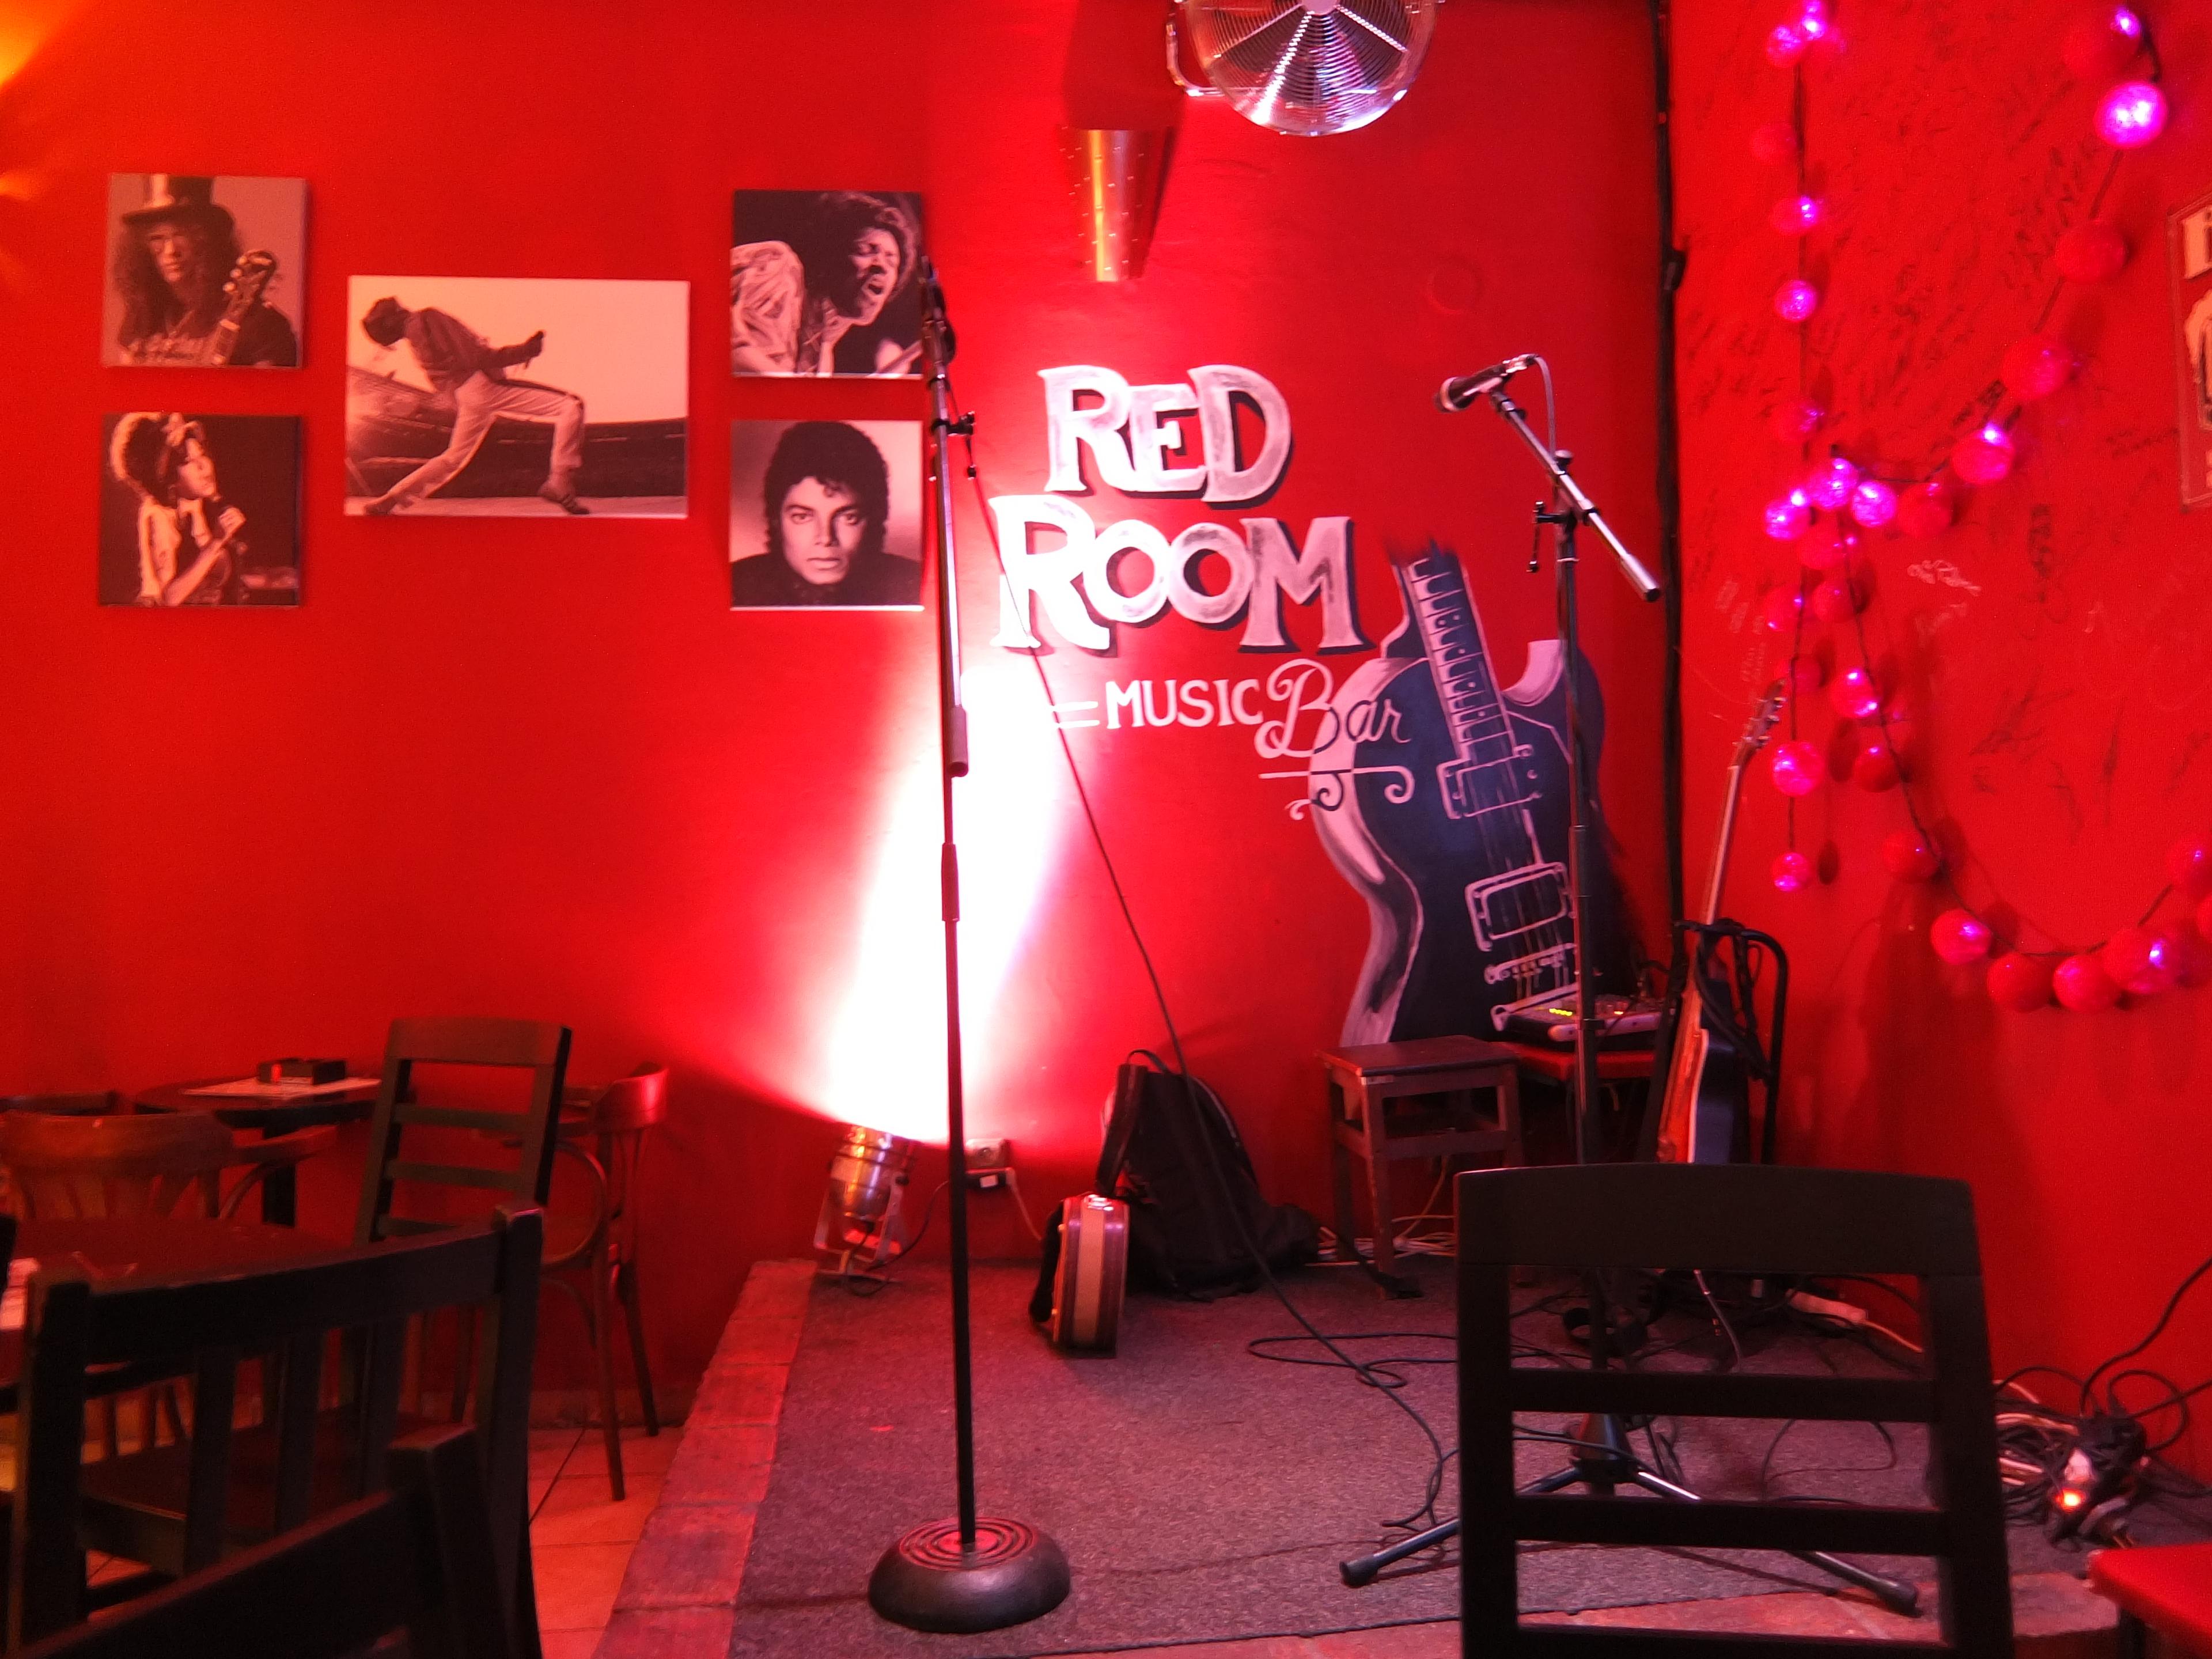 Cover image of this place RedRoom bar